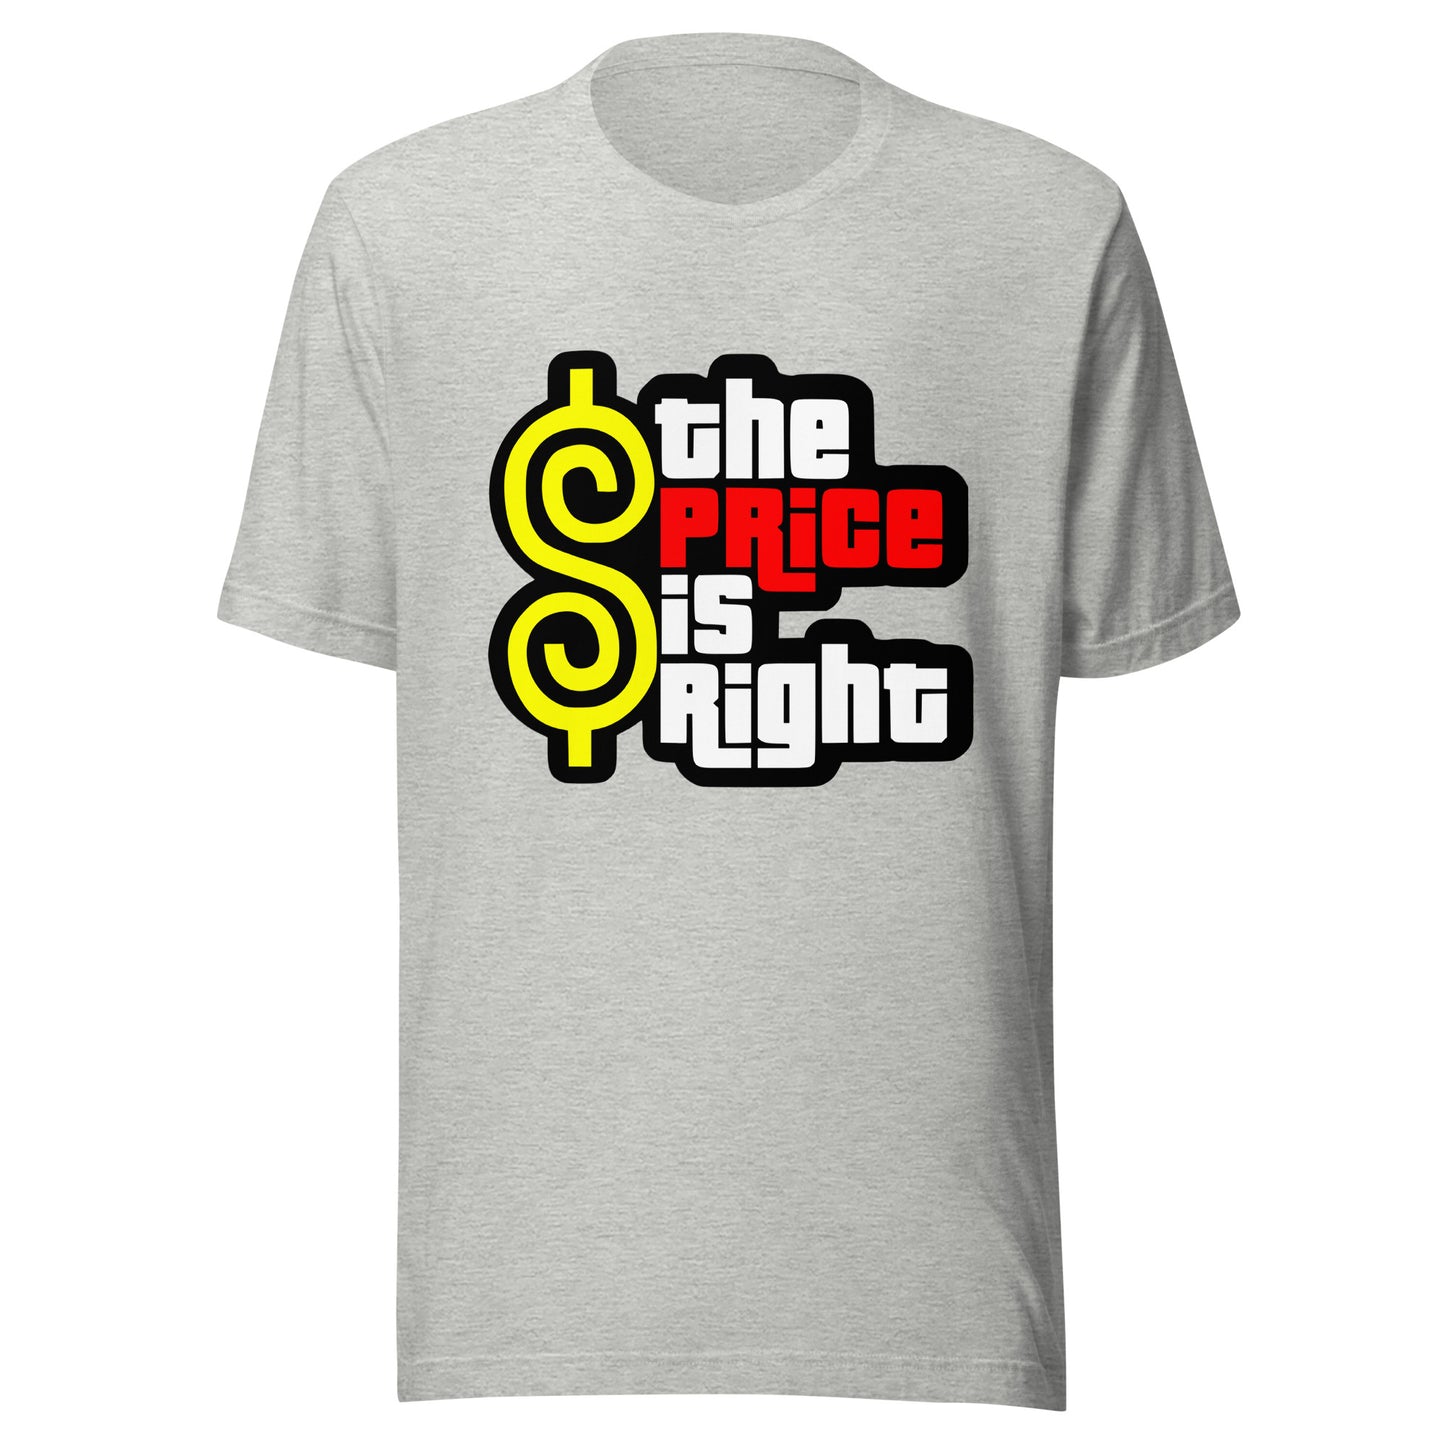 Unisex t-shirt - The Price is Right T-Shirt